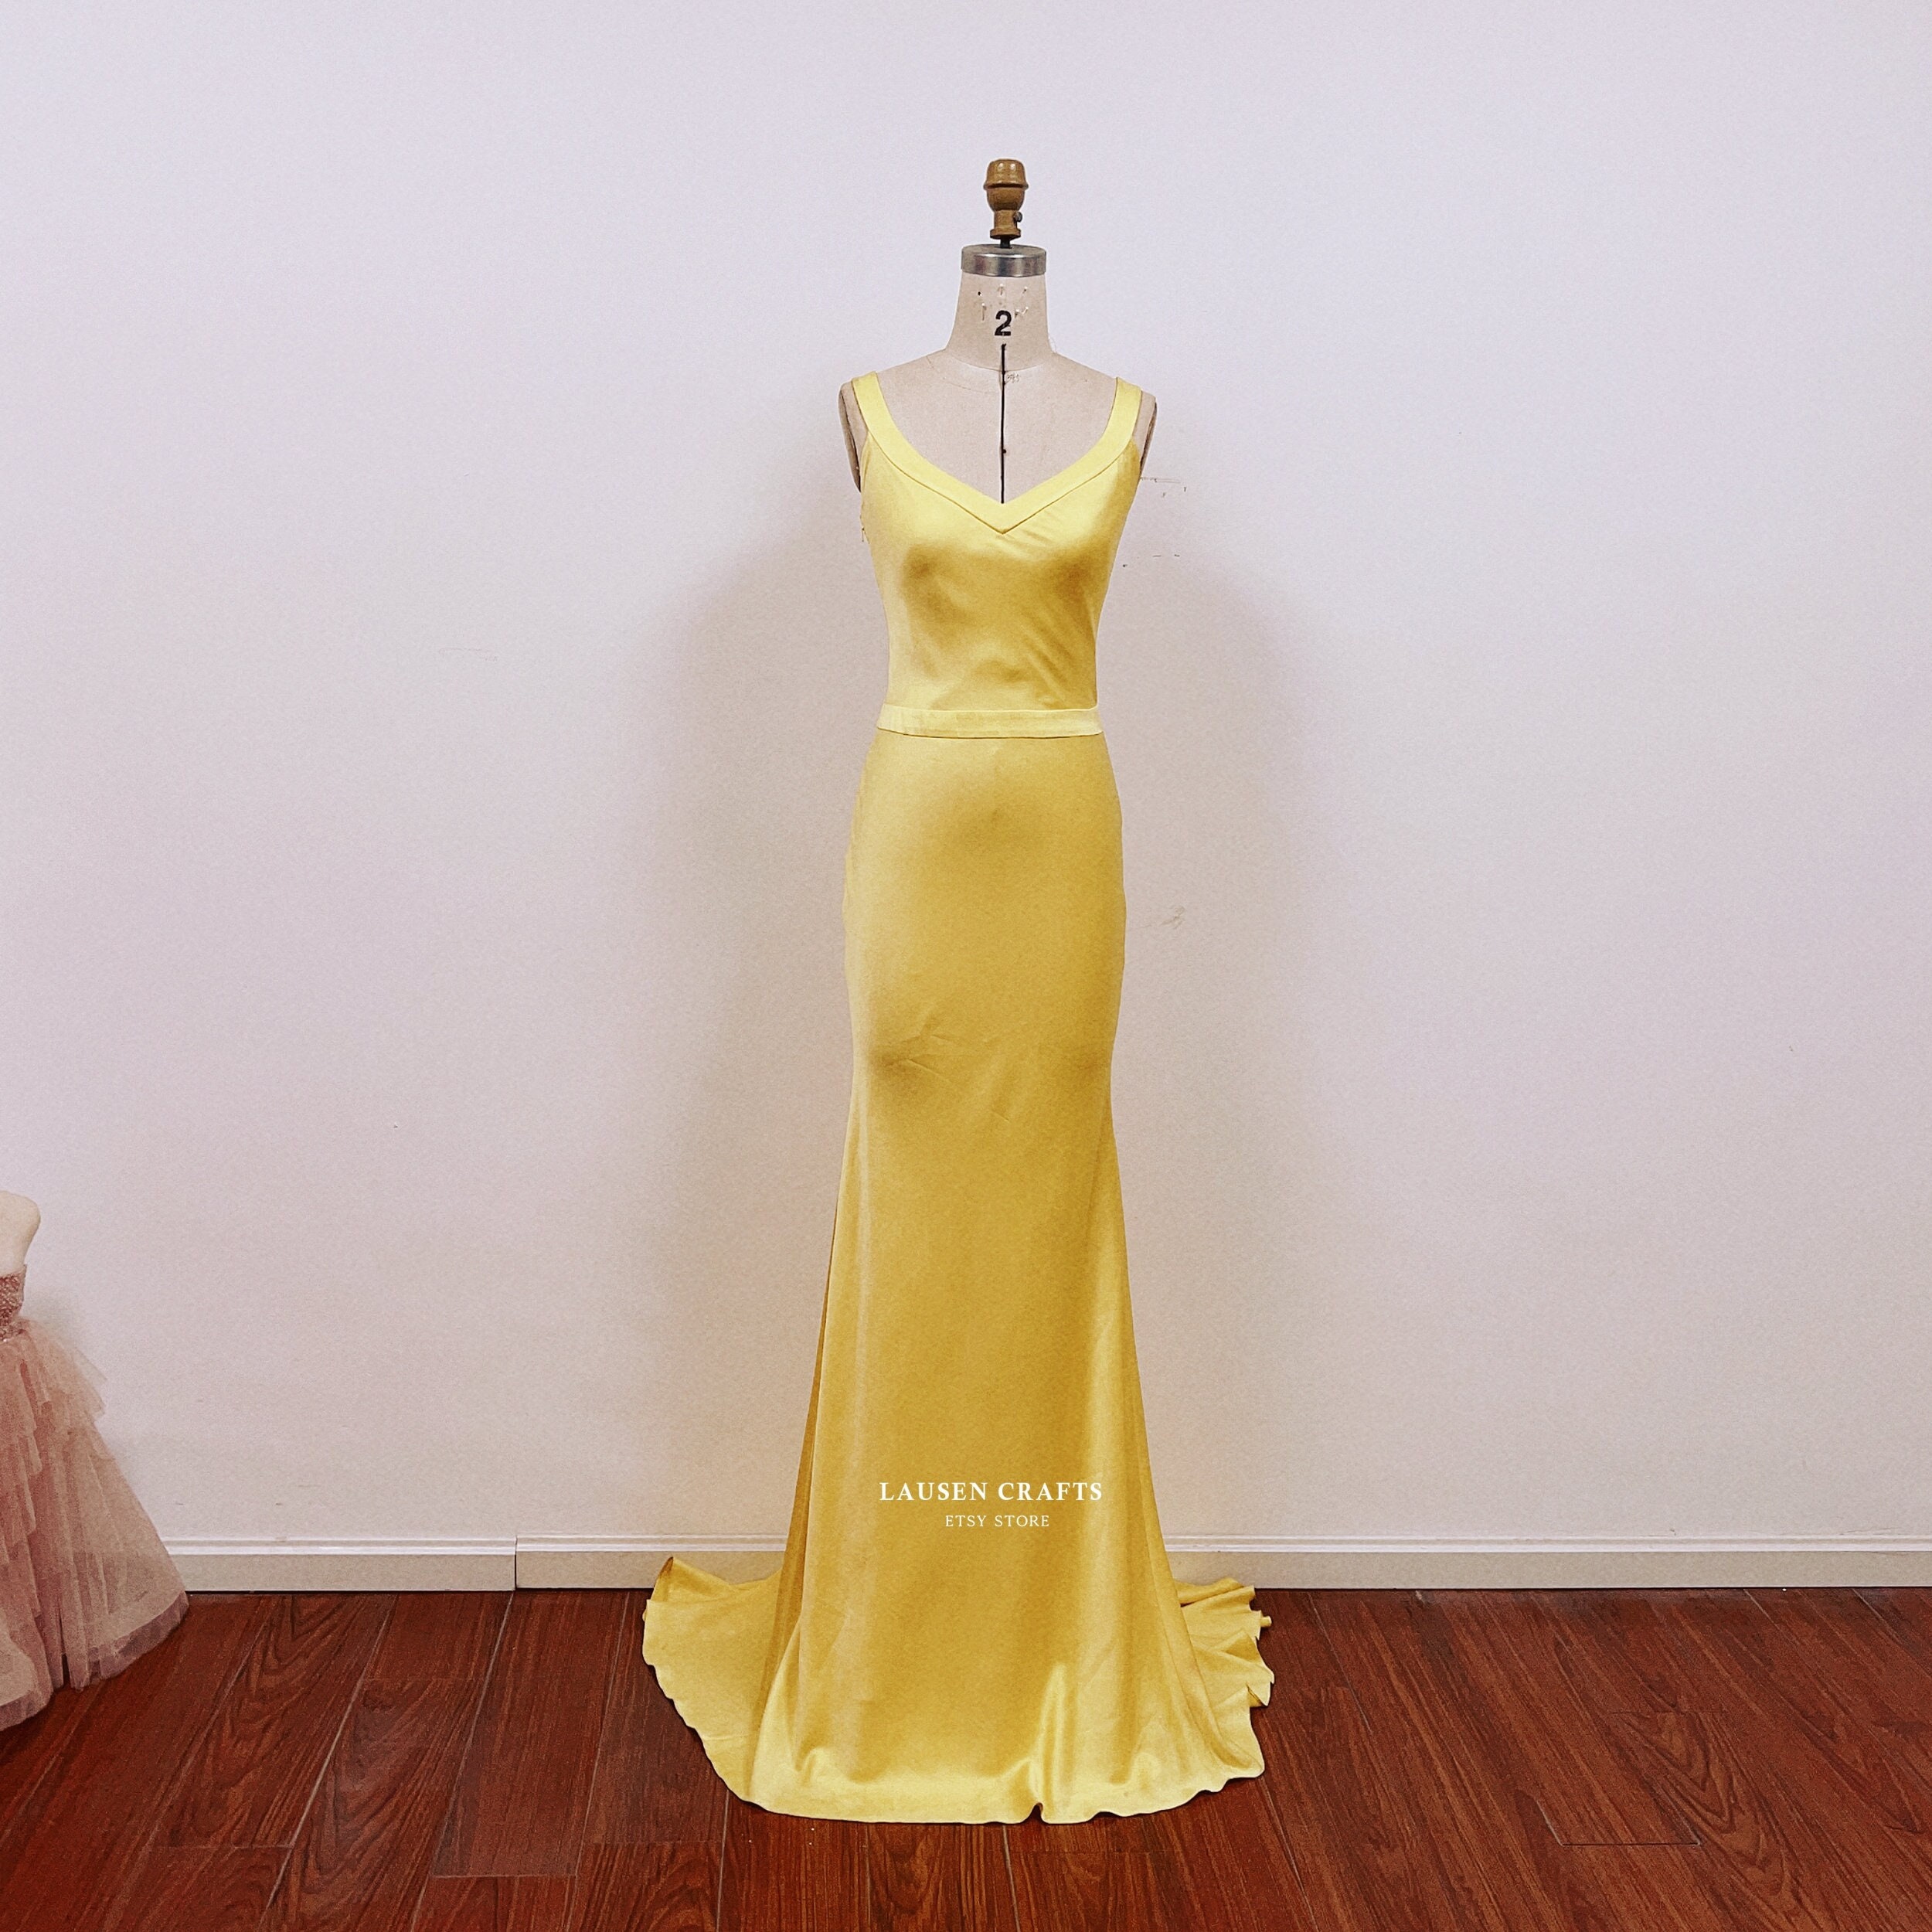 Yellow Satin Embroidered Party Wear Gown | Latest Kurti Designs